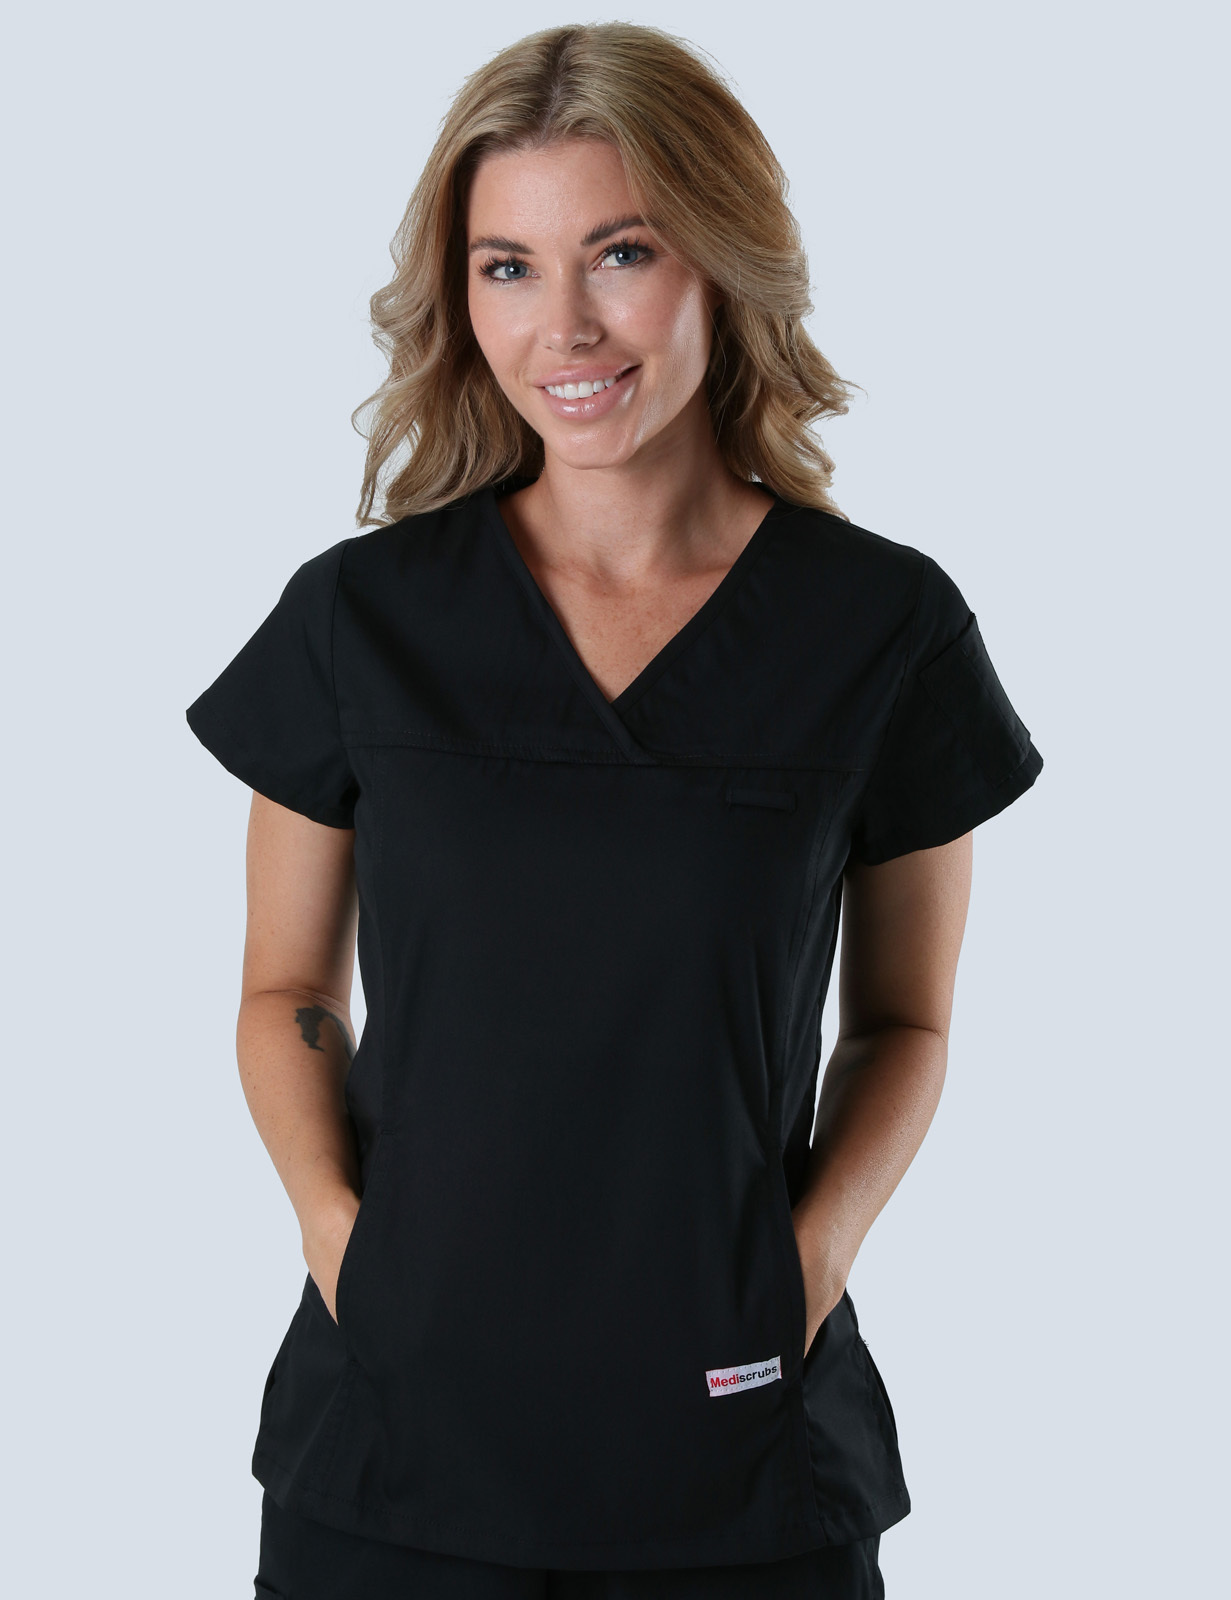 Toowoomba - ED Doctor (Women's Fit Solid Scrub Top and Cargo Pants in Black incl Logos)